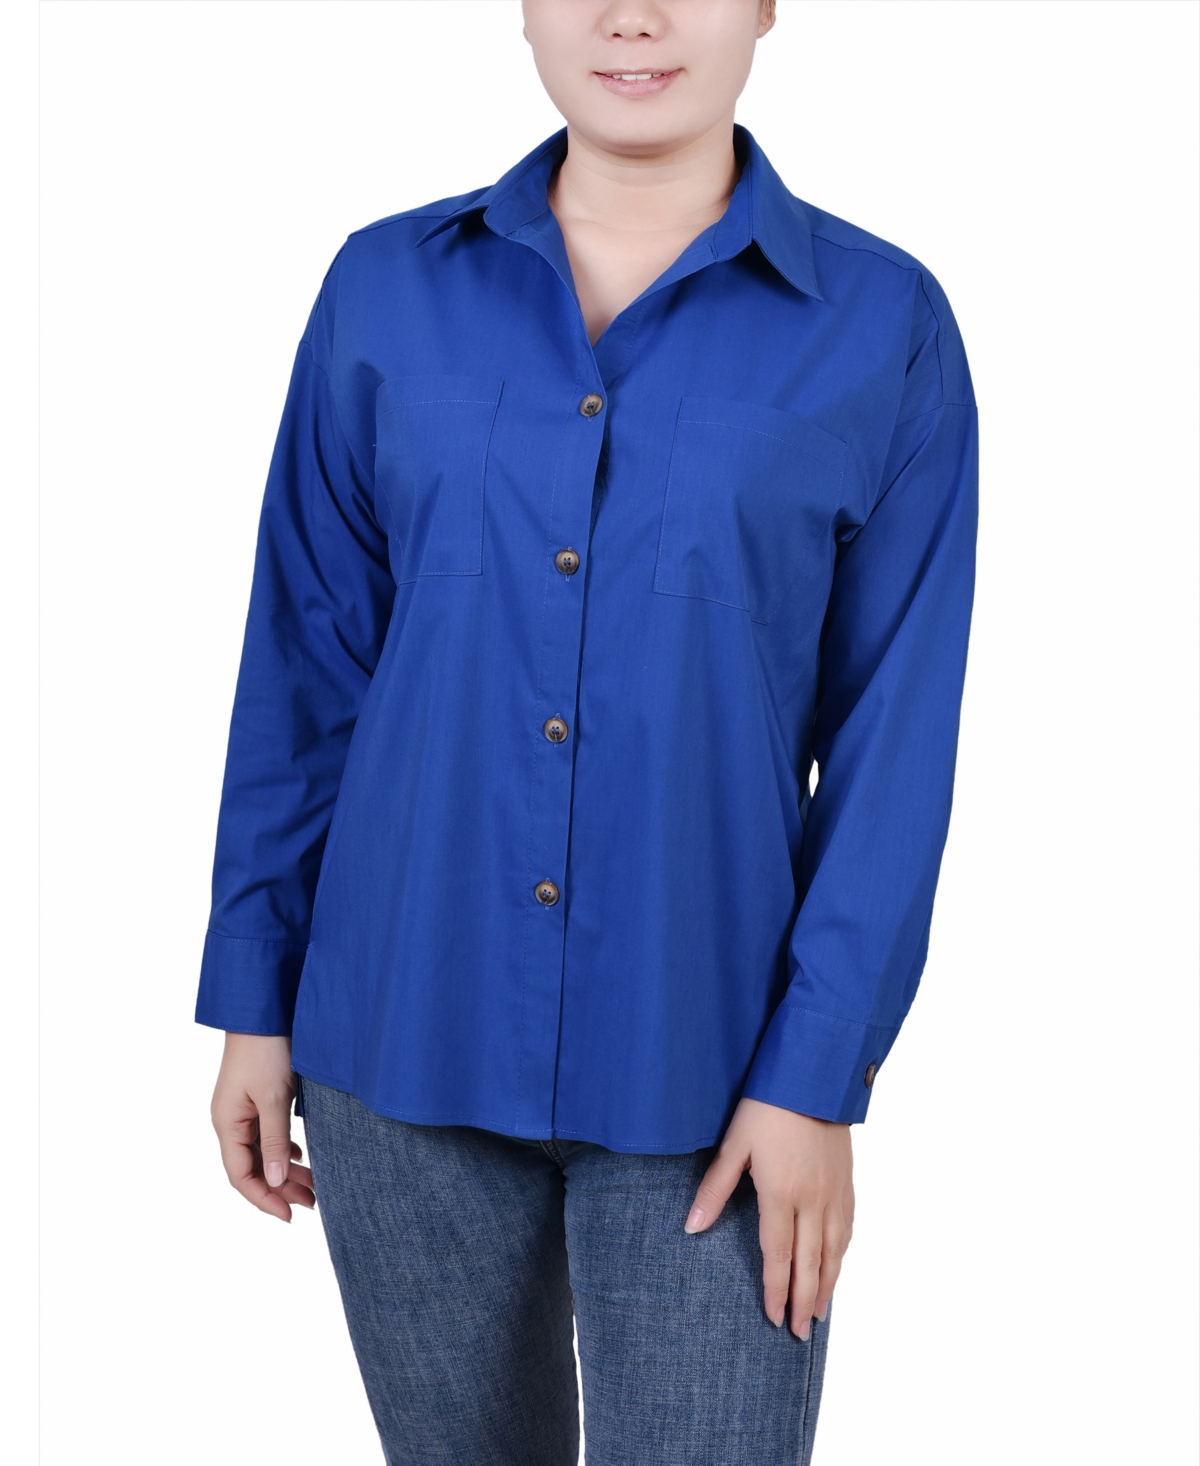 Petite Long Sleeve Blouse with Chest Pockets - Electric Blue Lemonade